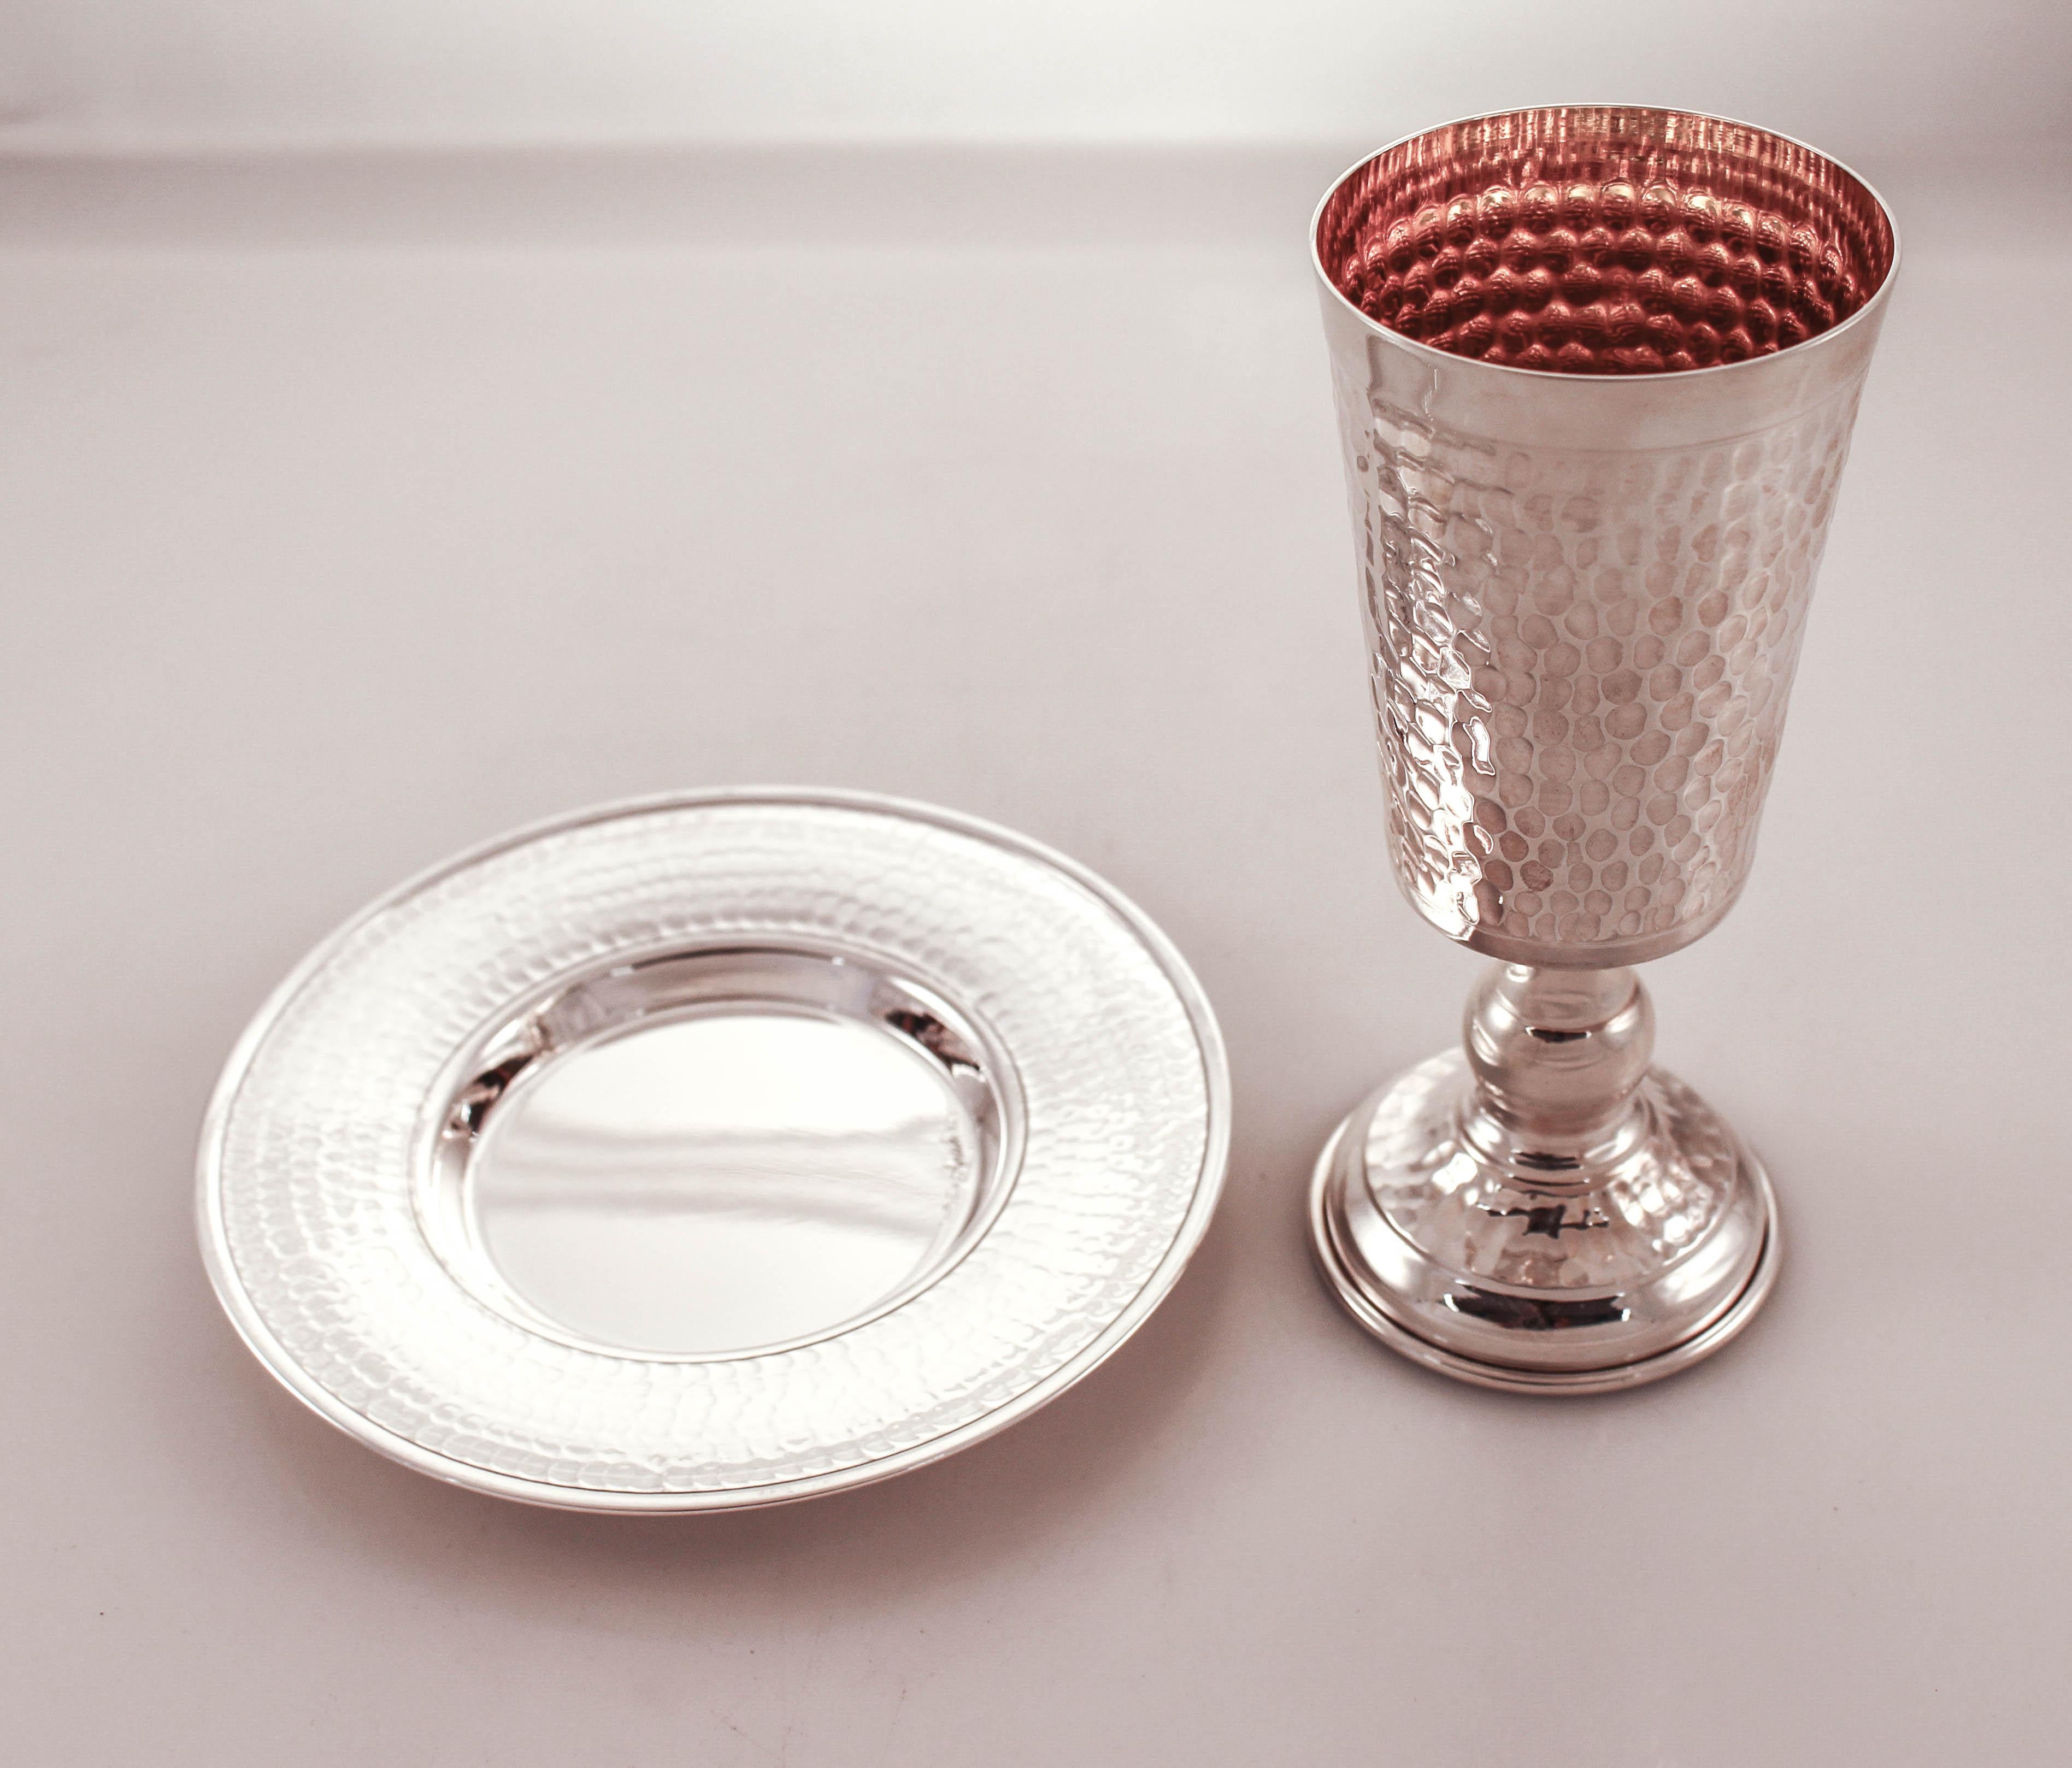 A sterling silver Kiddush cup and matching plate in a hammered design. Bold, masculine and contemporary; a much-needed change from the super ornate Judaica we’ve seen over the years.